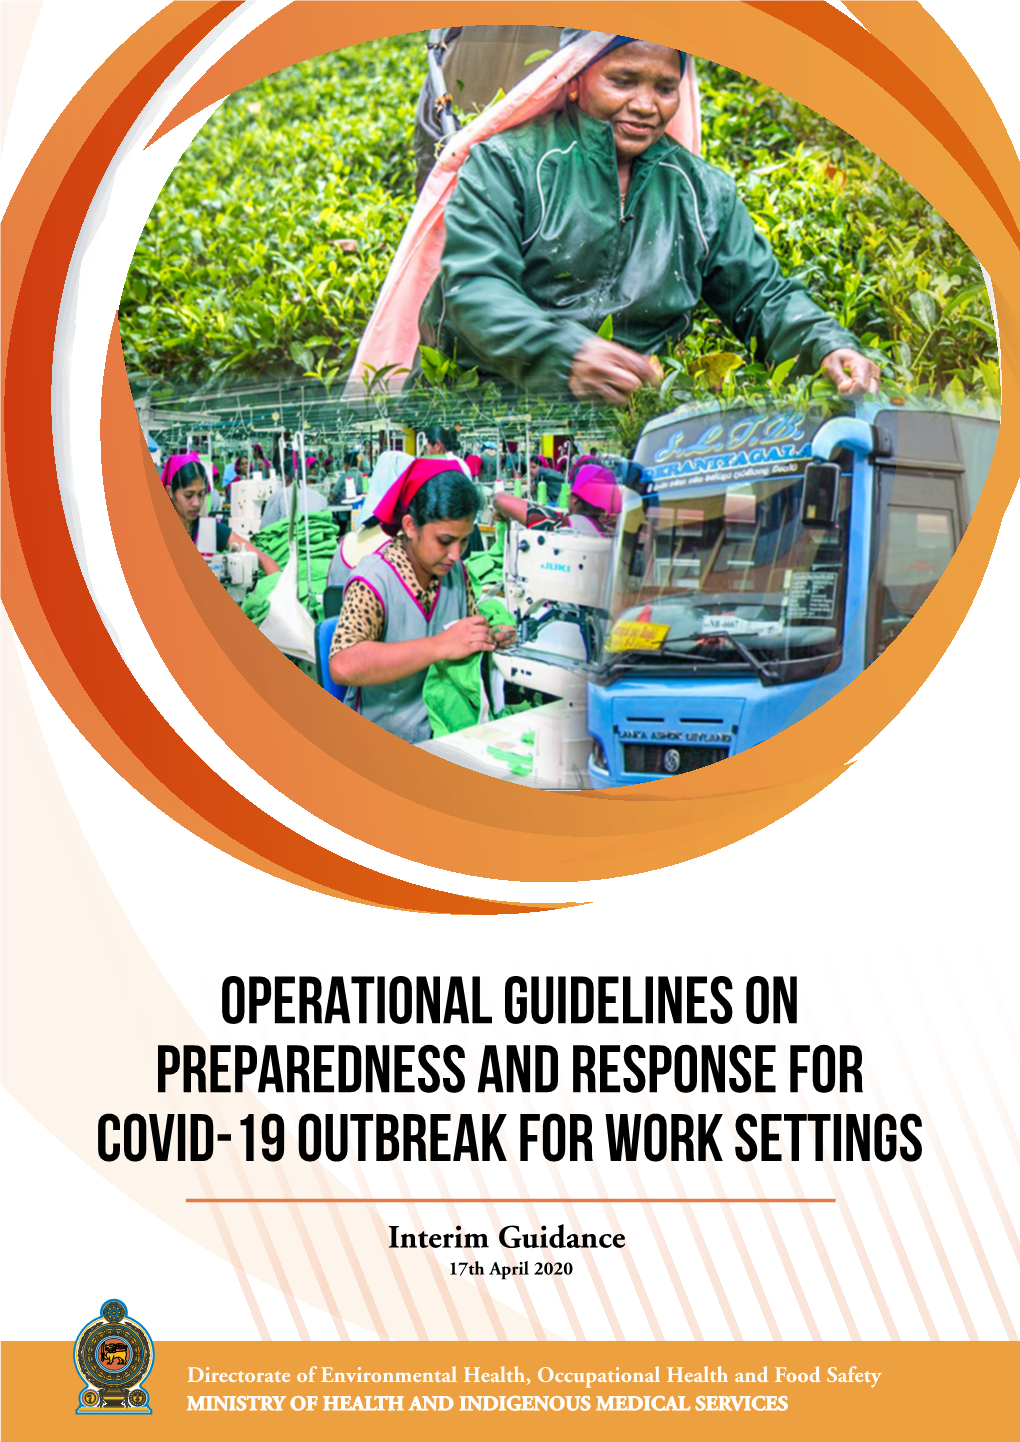 Operational Guidelines on Preparedness and Response for Covid-19 Outbreak for Work Settings Ministry of Health and Indigenous Medical Services